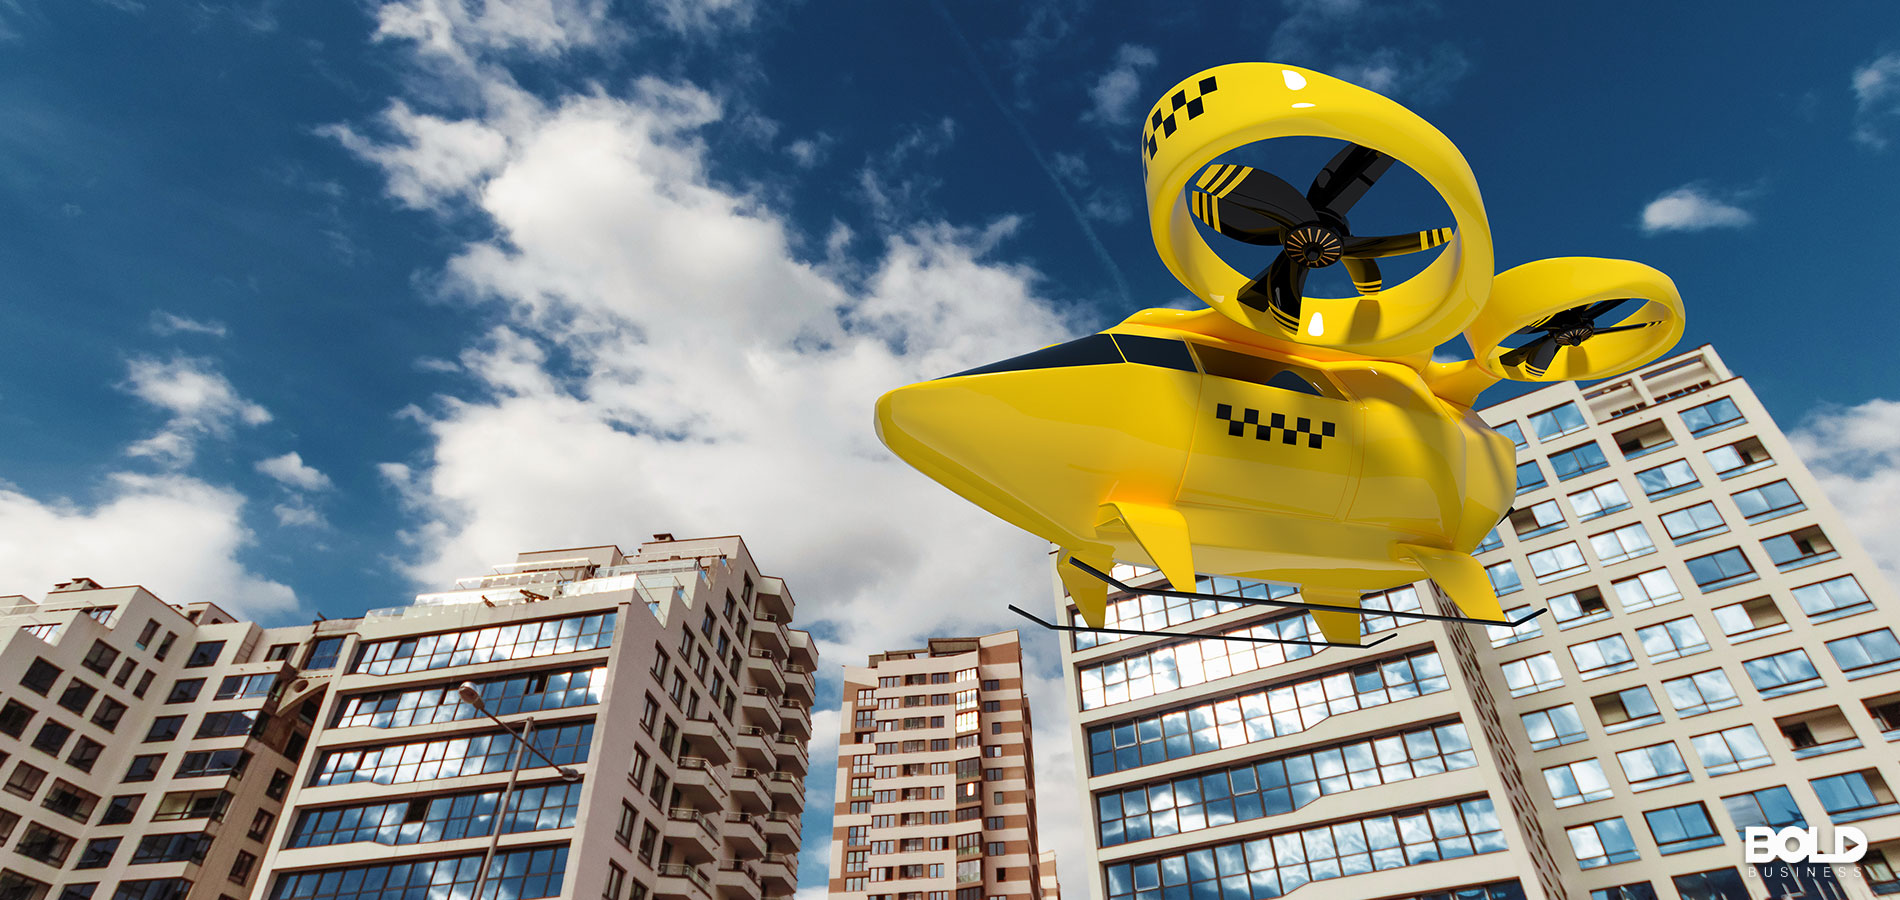 A yellow air taxi flying through the city